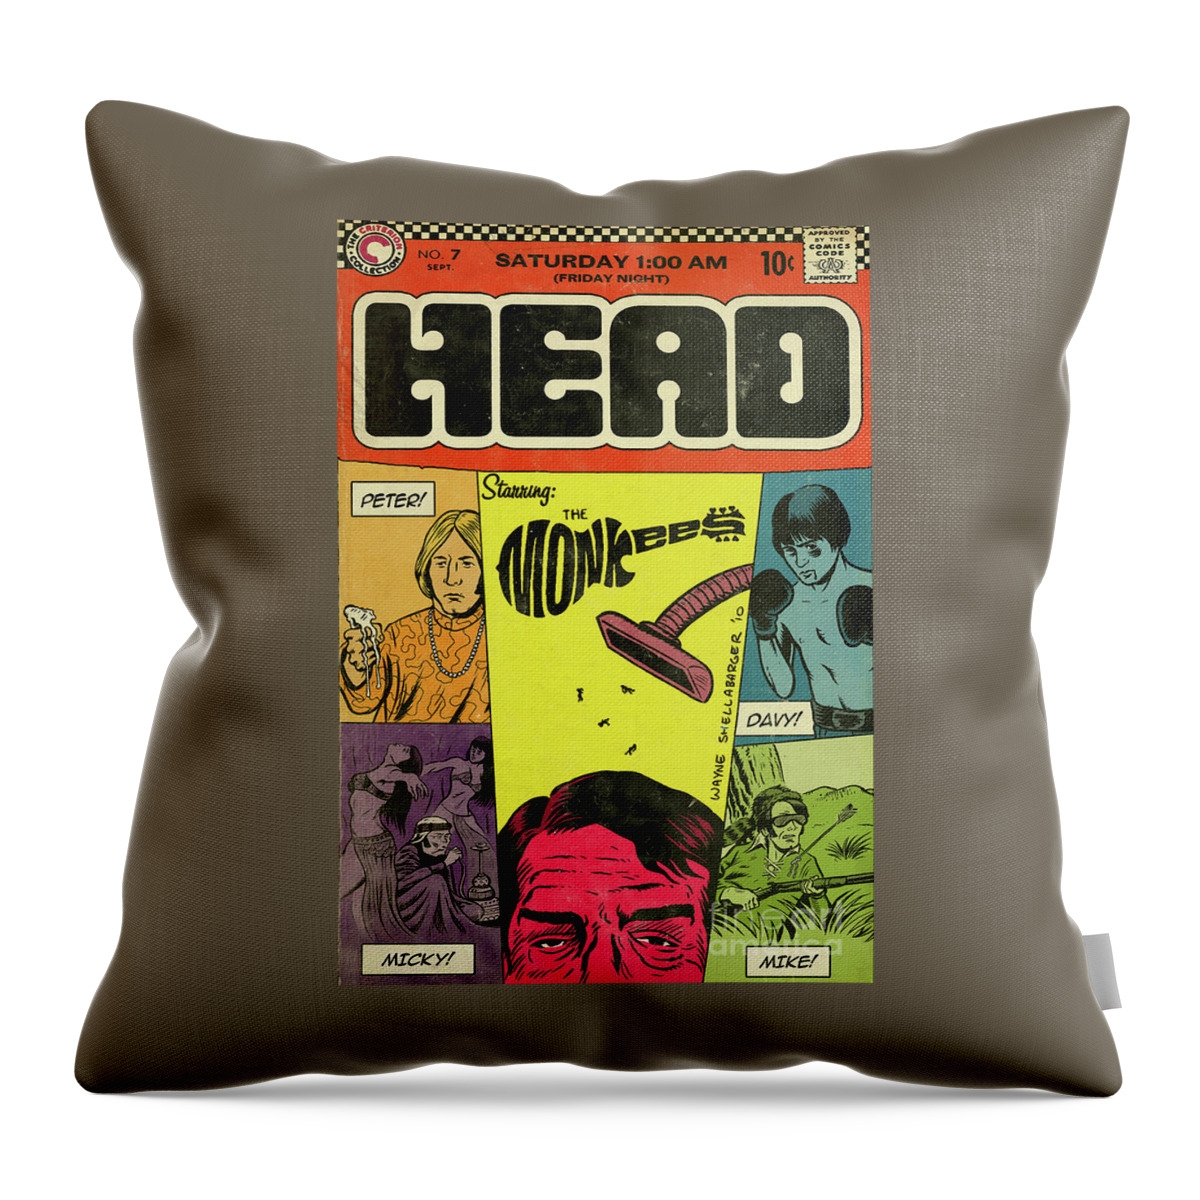 Monkees Throw Pillow featuring the photograph Monkees Concert Poster by Action